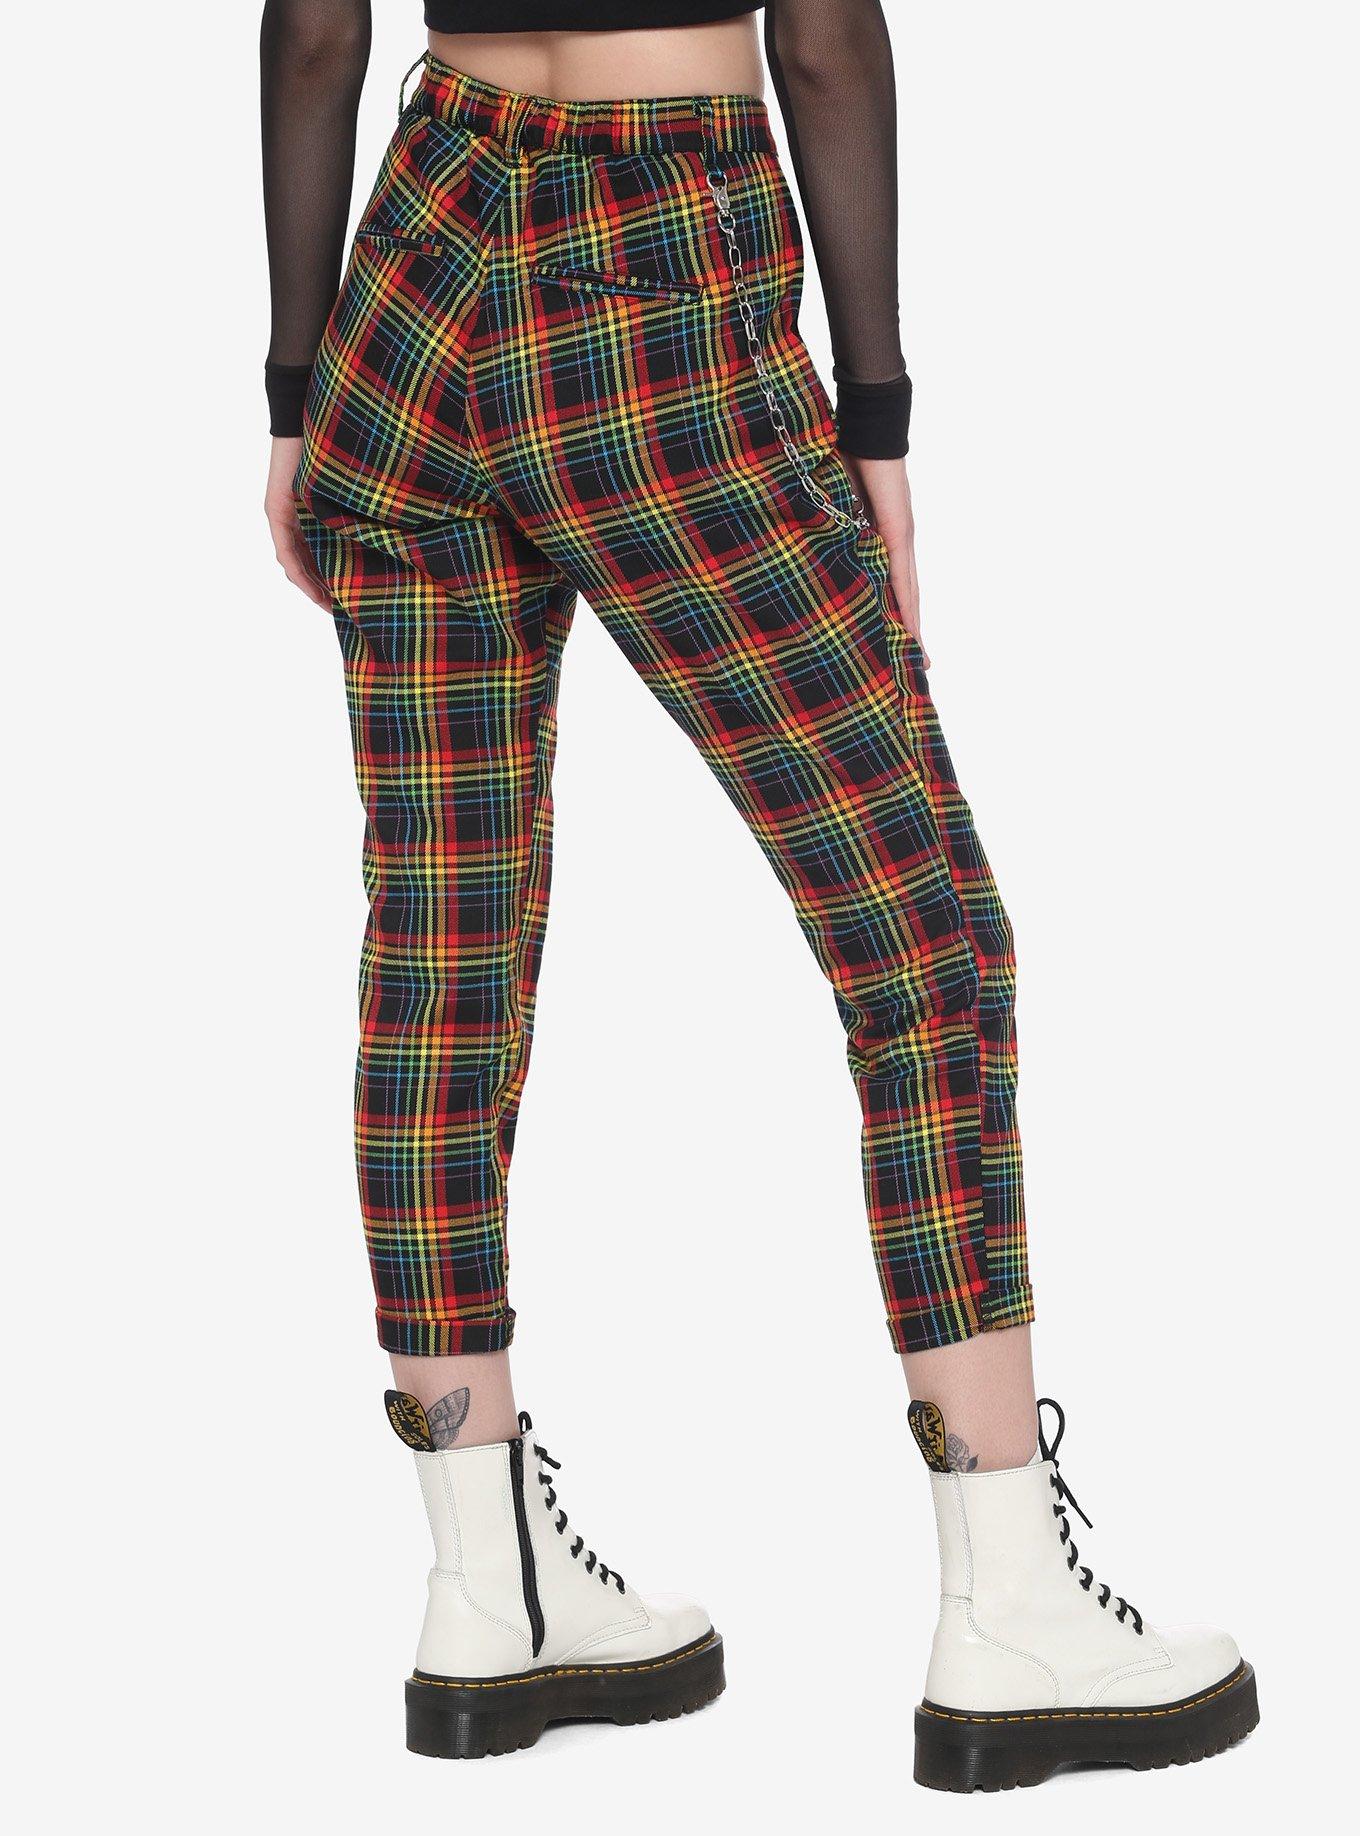 Hot Topic Pink Plaid Pants size M Size M - $24 - From Carmen